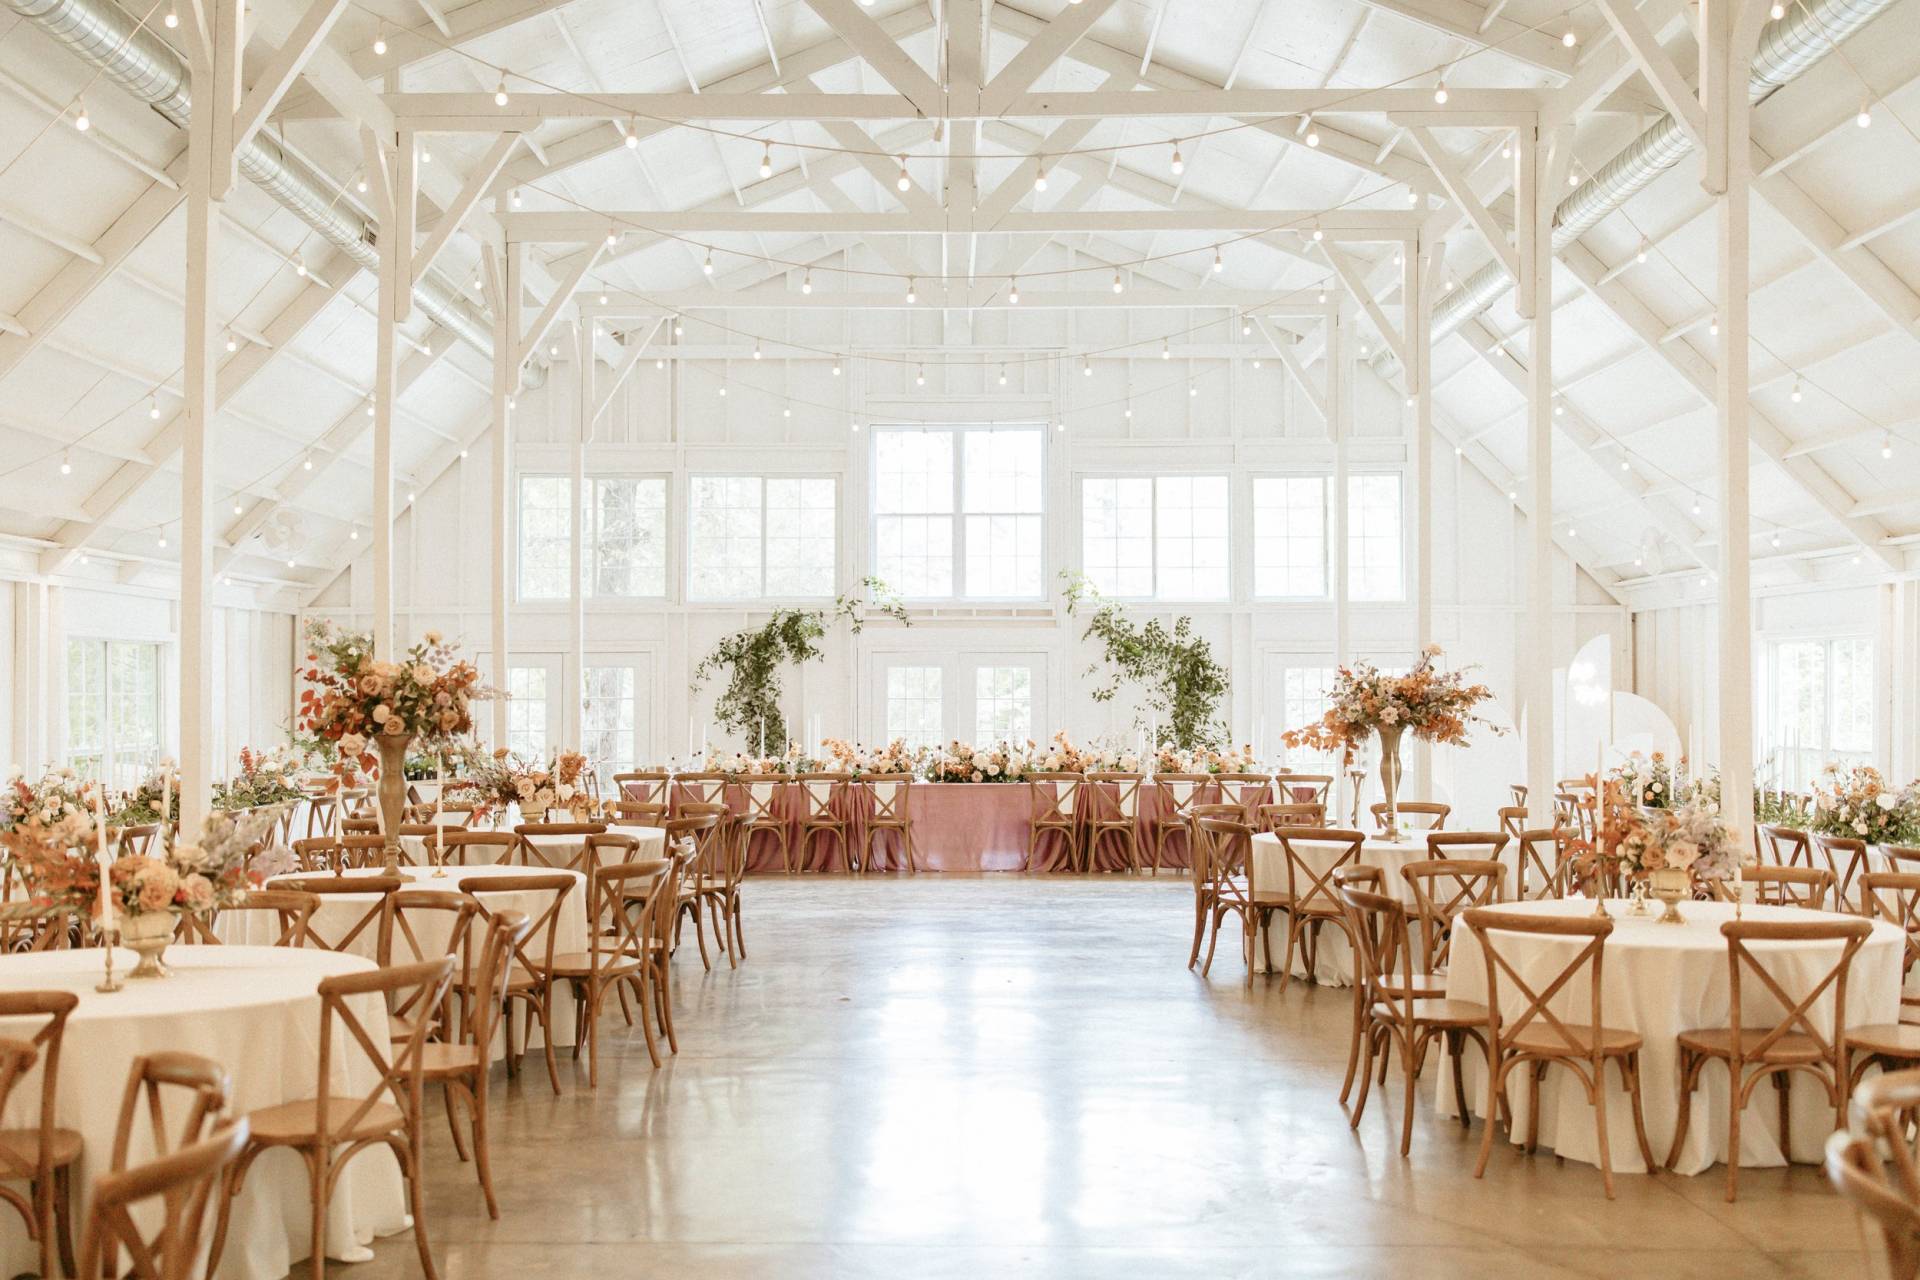 kindred barn is one of the most popular wedding venues in northwest arkansas